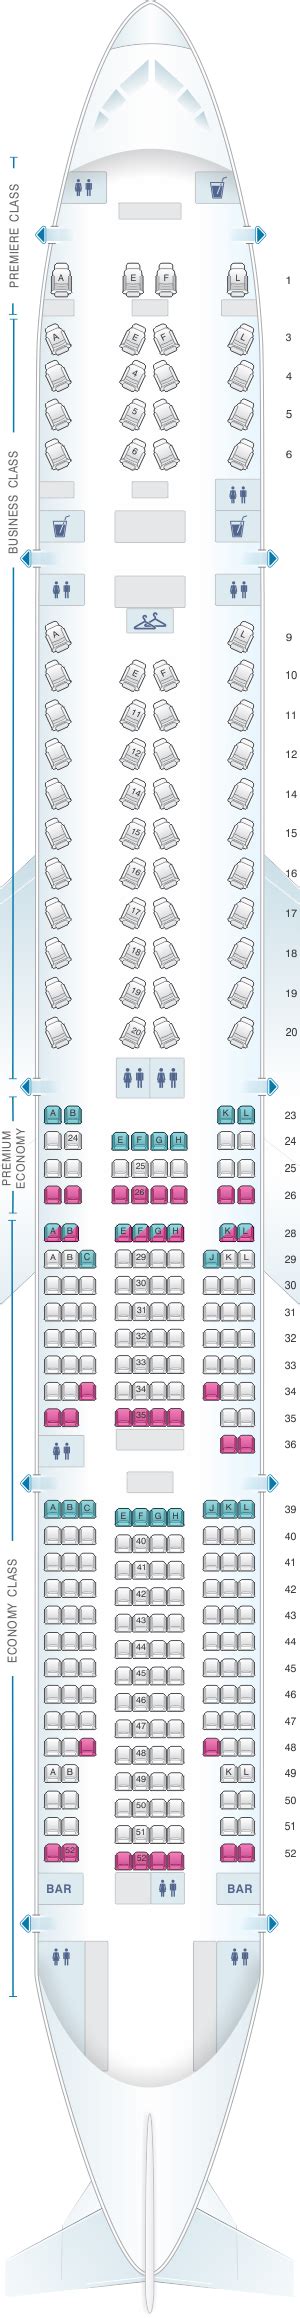 Air France Boeing 787 Seat Map